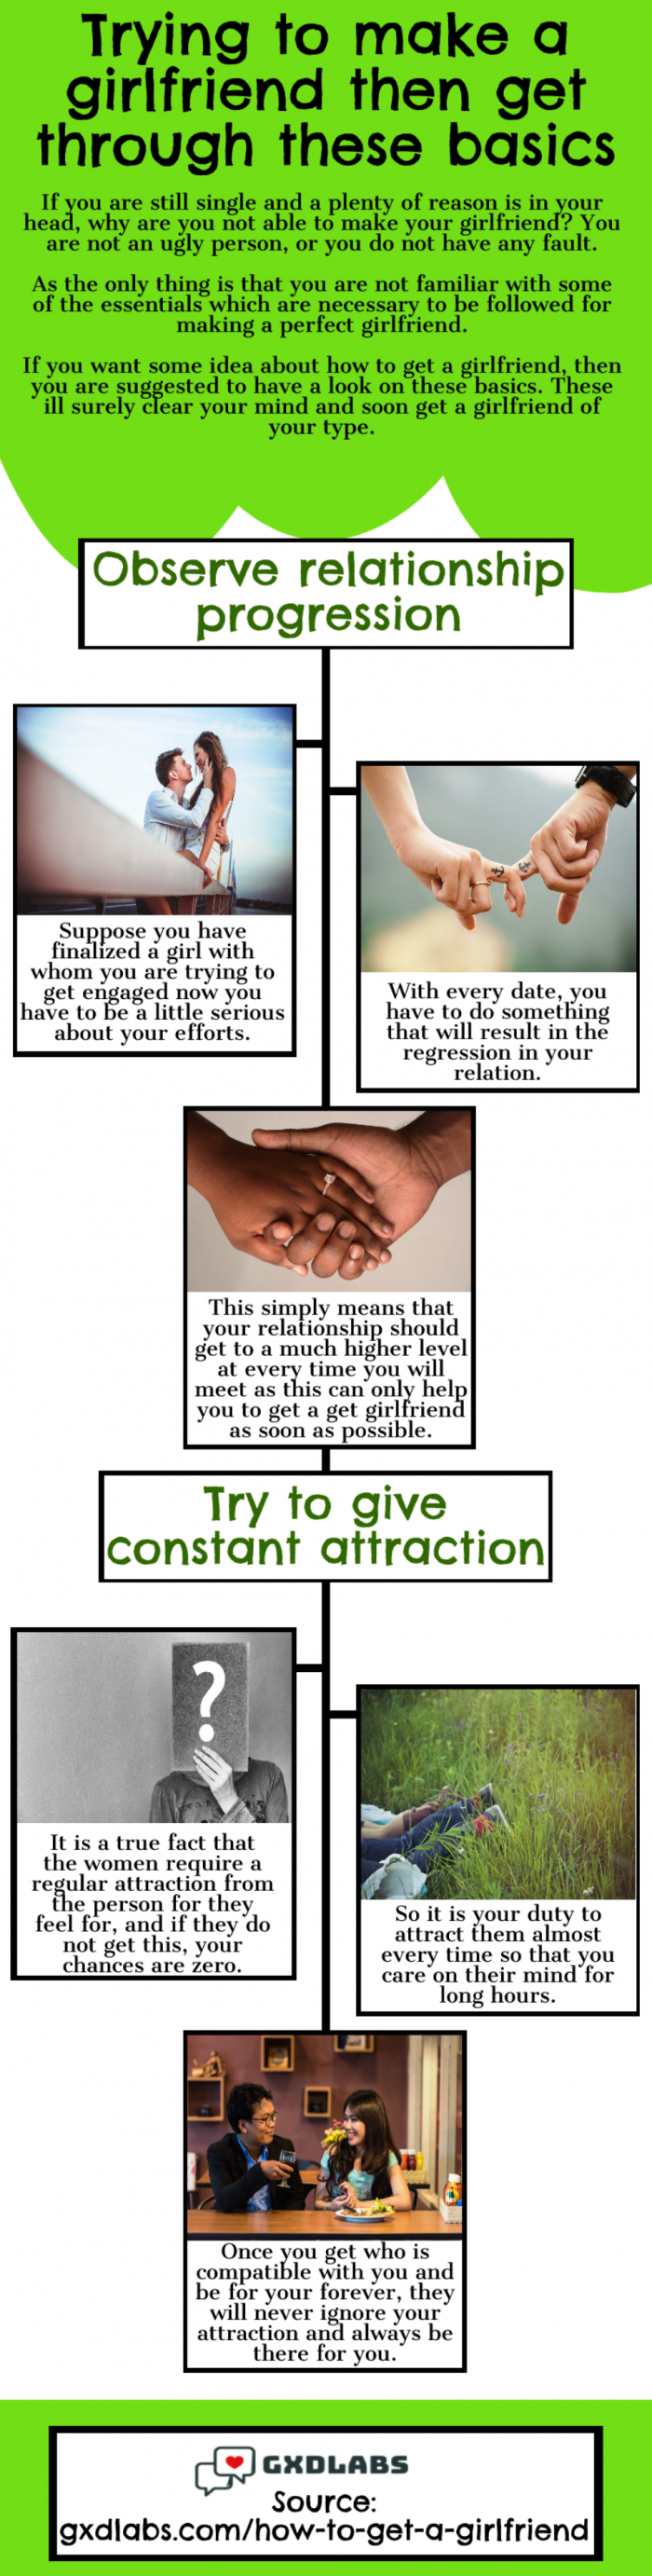 Learn certain tips to find a girlfriend